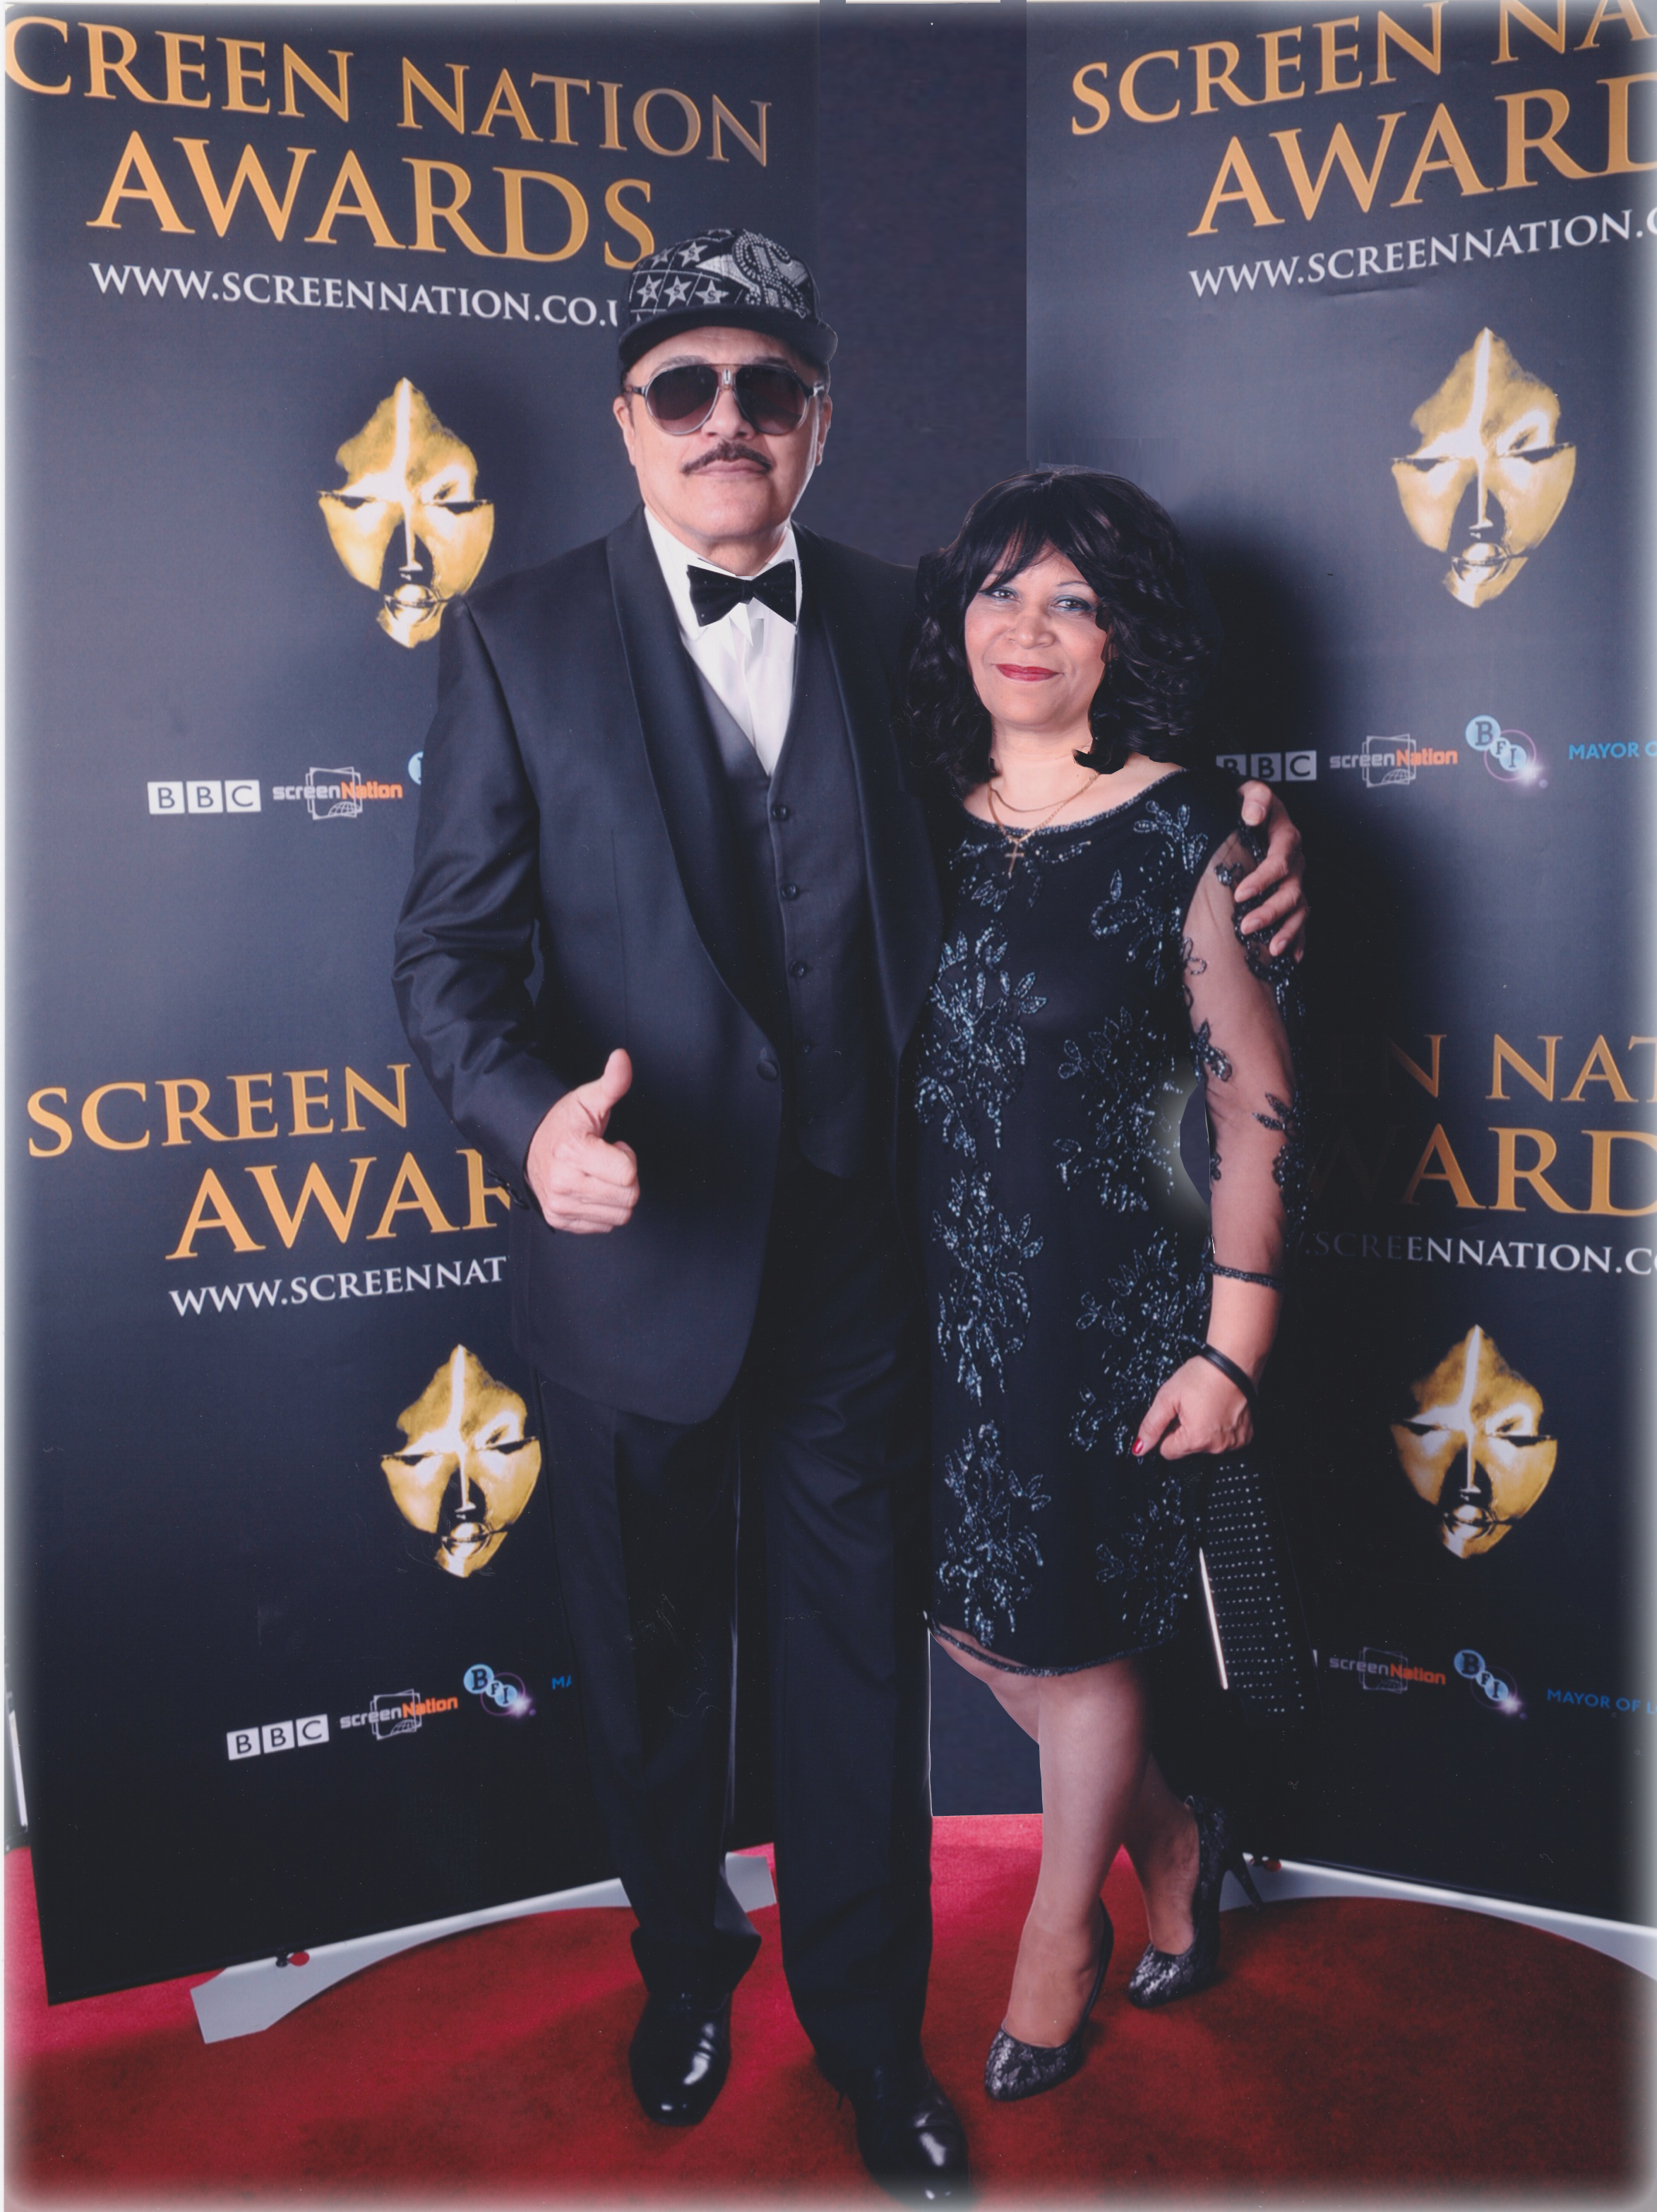 Celebrity music artist/film producer, Byron Byrd and his wife Pam are invited guests at the 2015 Screen Nation Awards in London